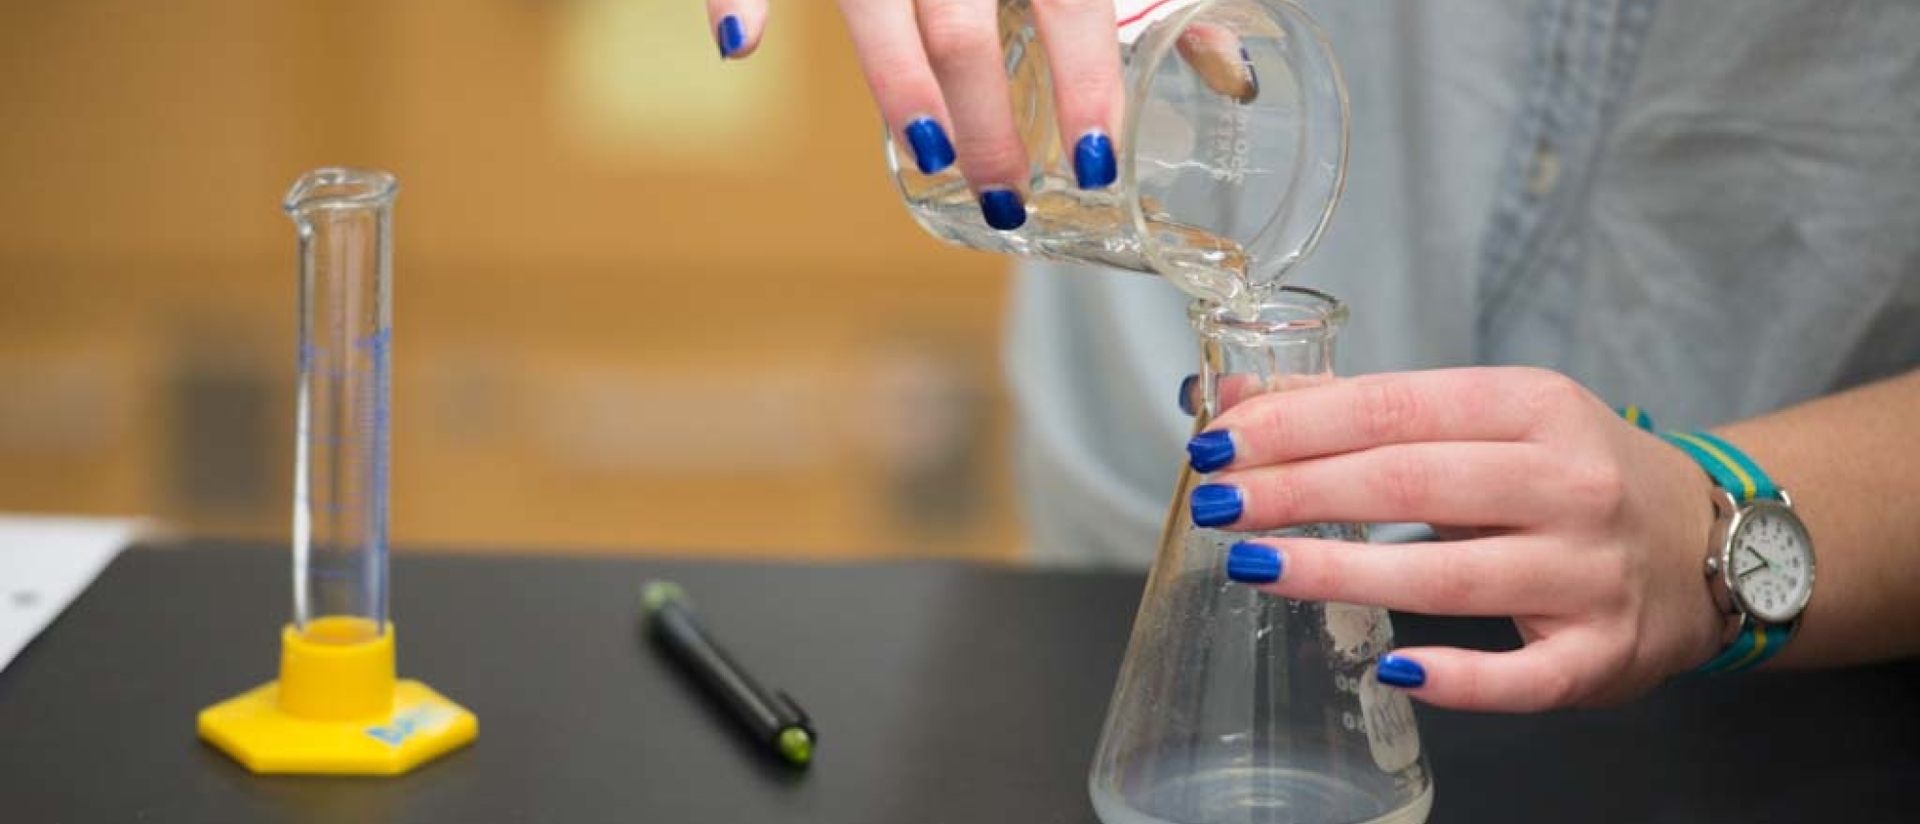 Students using chemistry instruments.